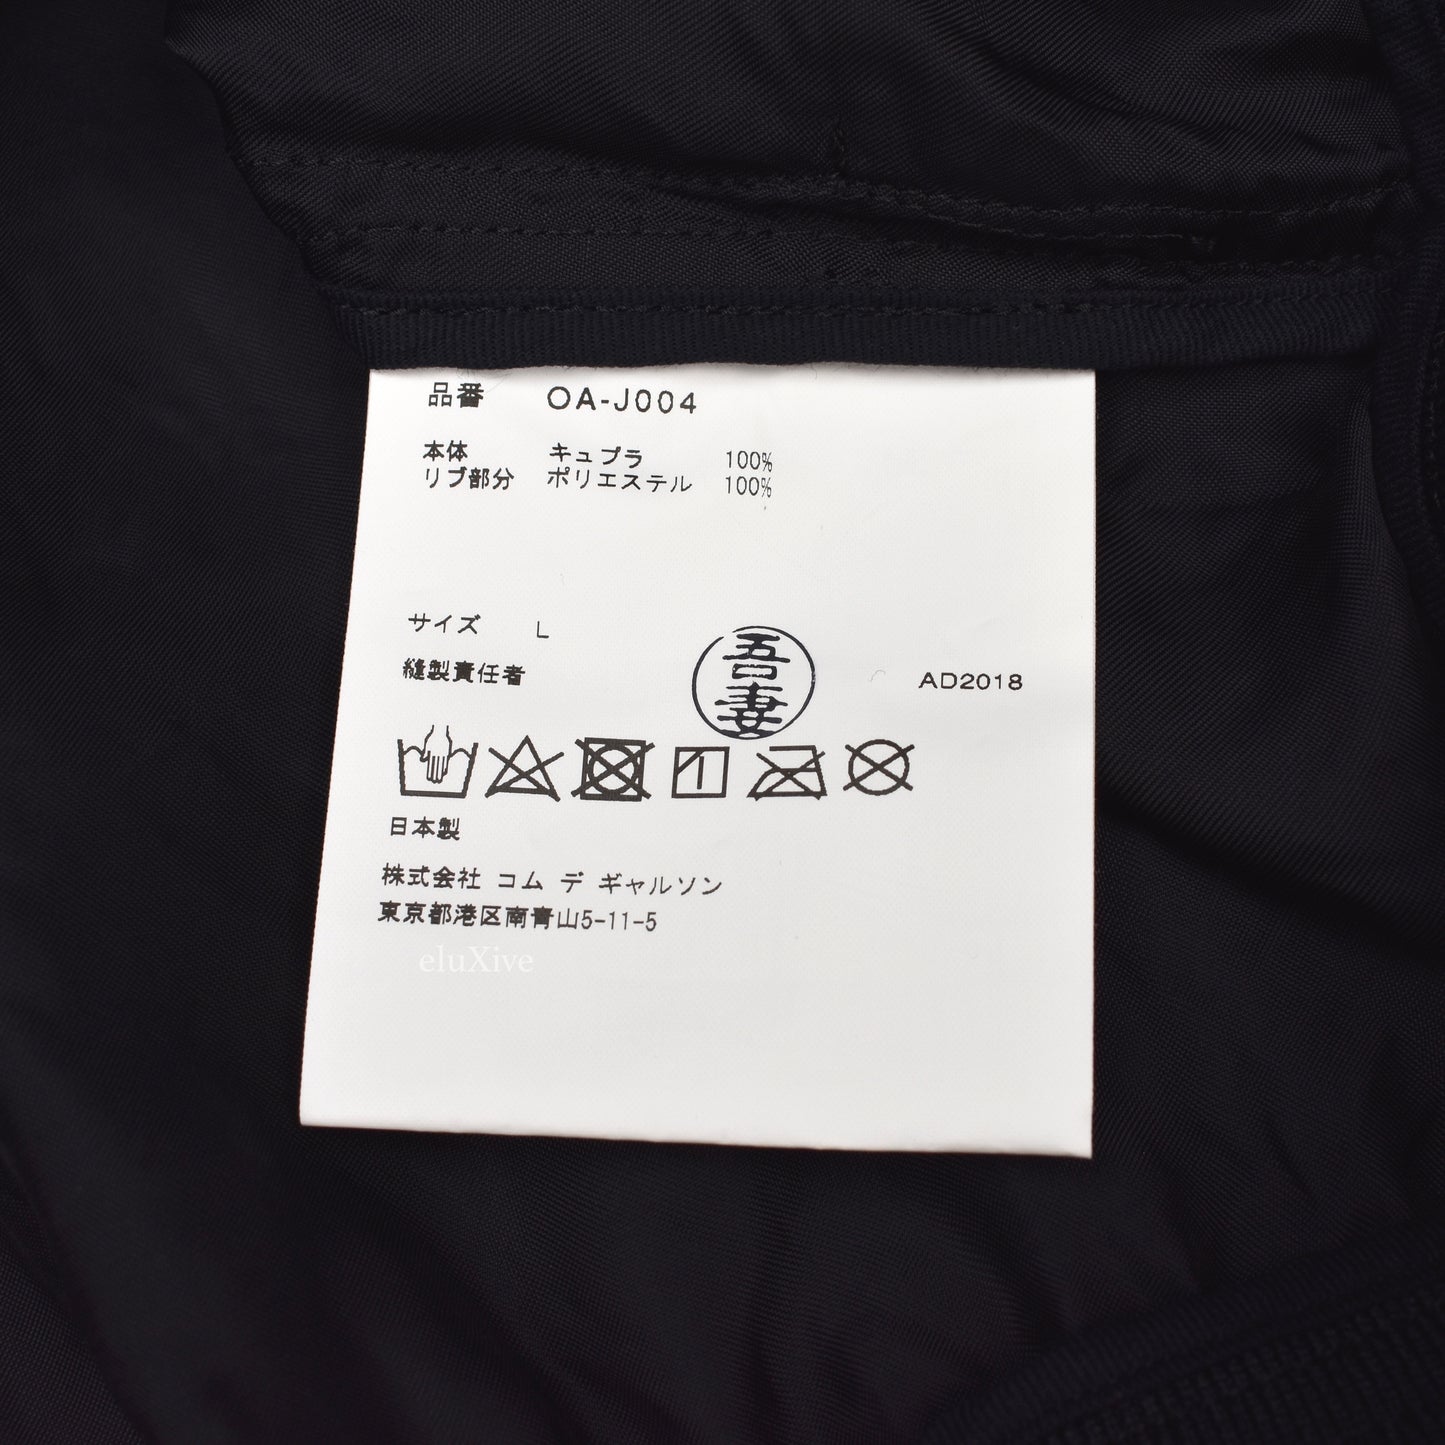 Comme des Garcons - CDG Breaking News A/W '84-'85 Staff Jacket